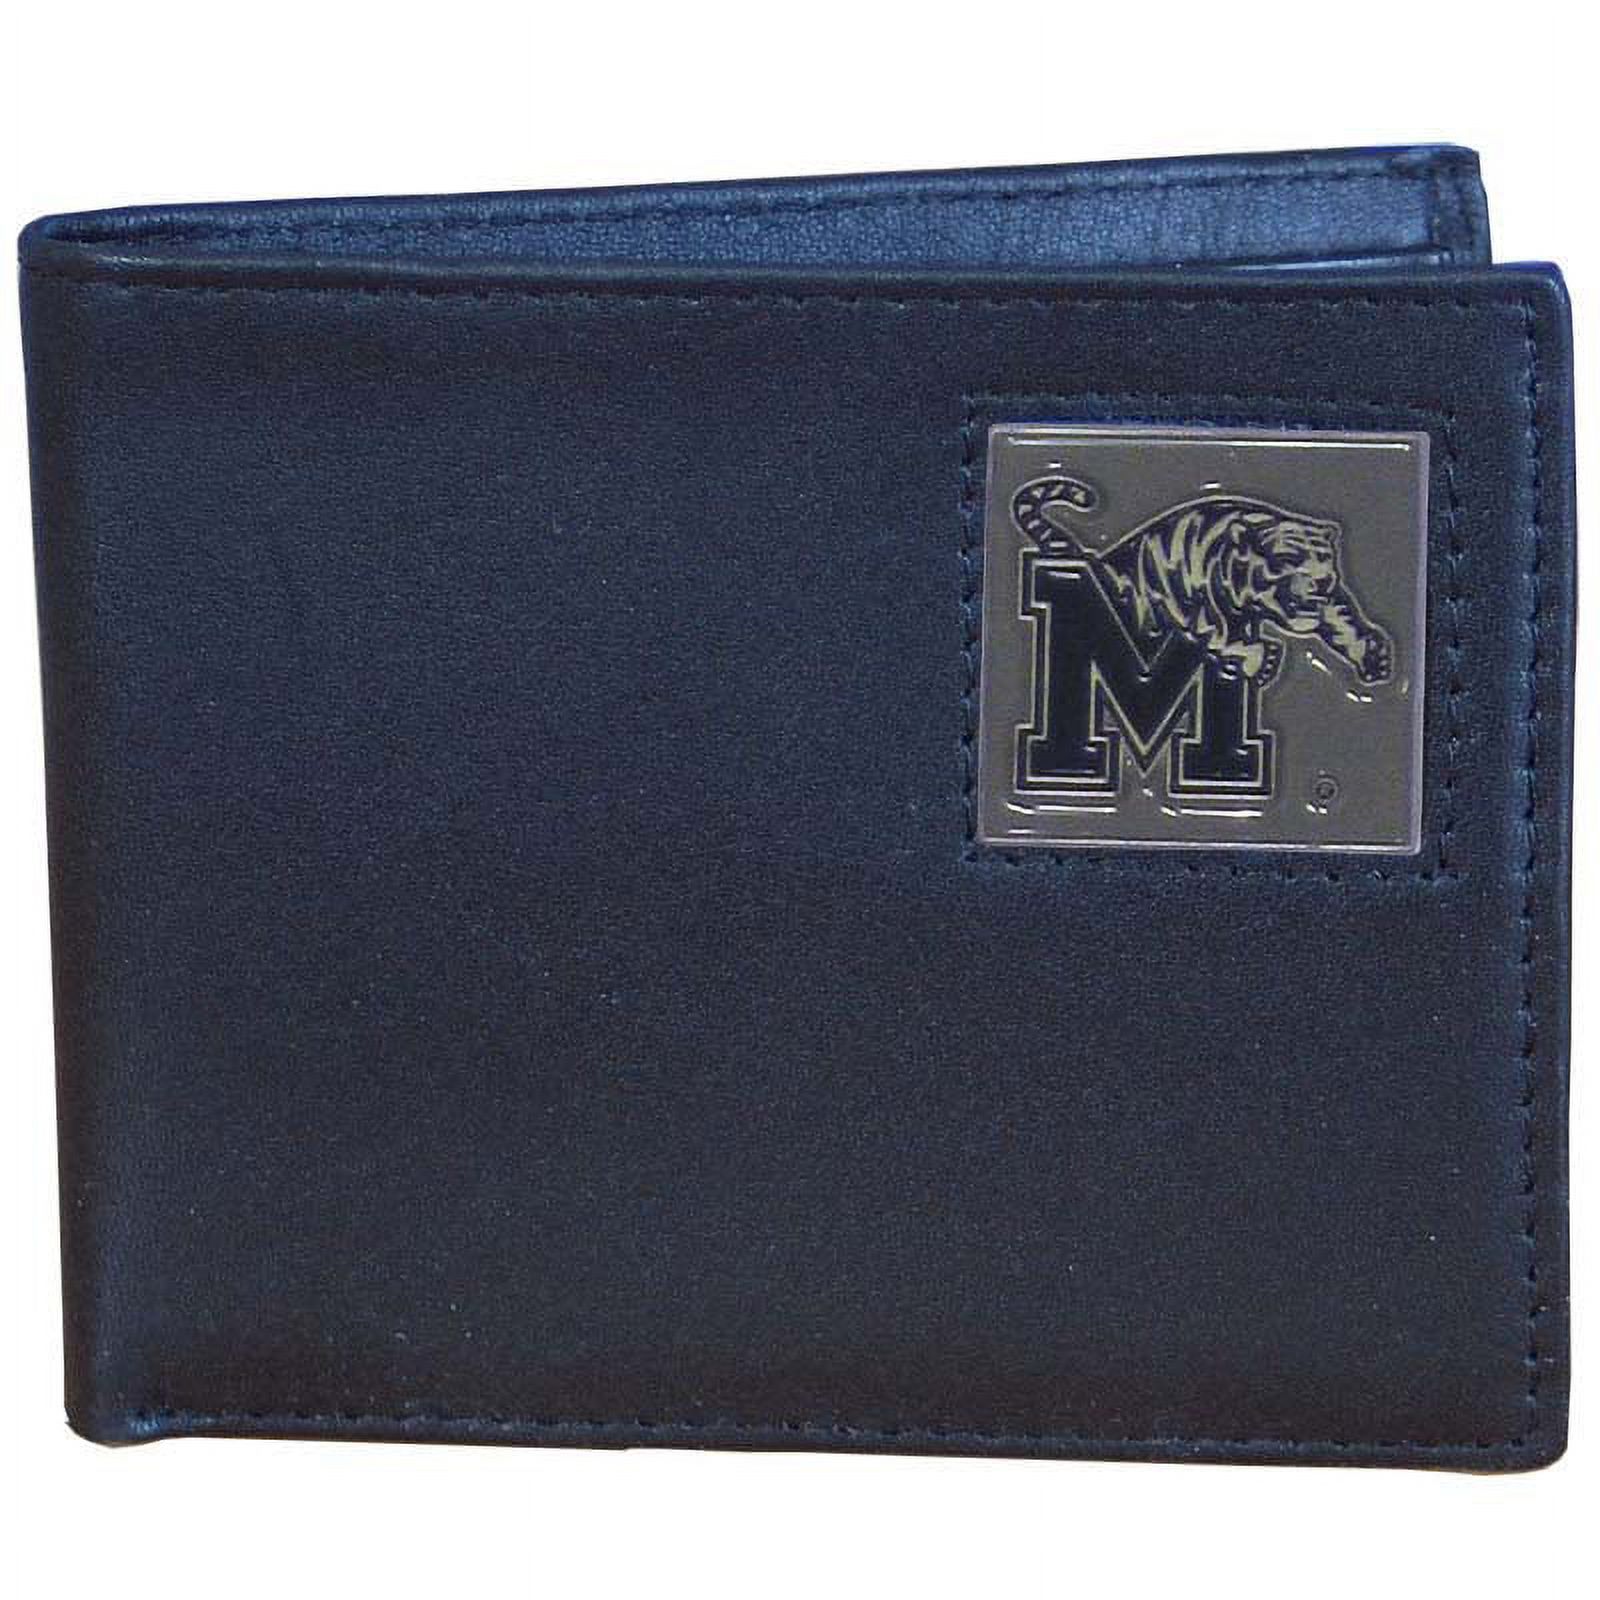 Memphis Tigers Official NCAA Leather Bi-fold Wallet by Siskiyou 159886 - image 1 of 2